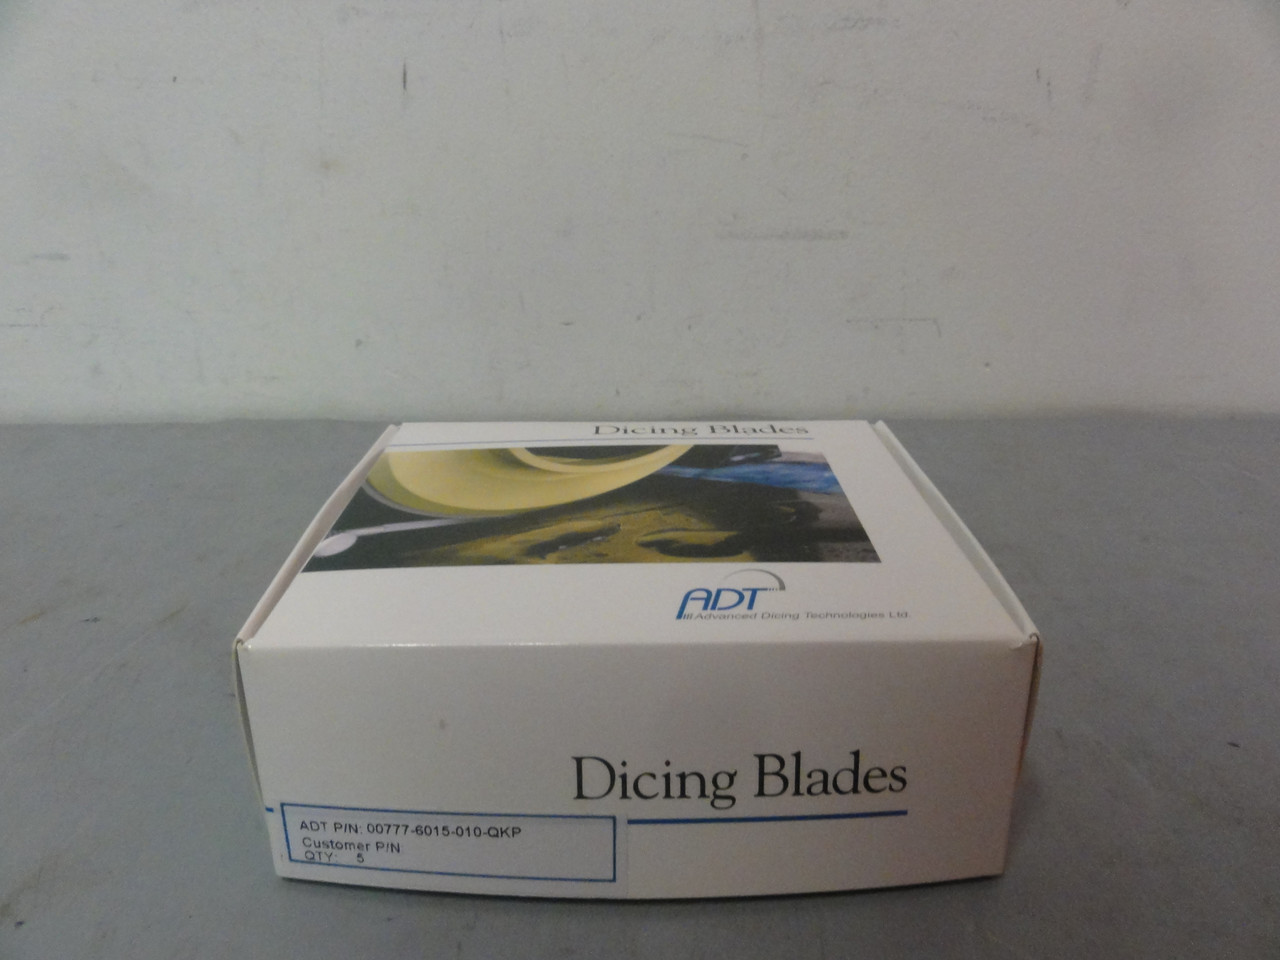 ADT 00777-6015-010-QKP Dicing Blades (Lot of 5) Brand New